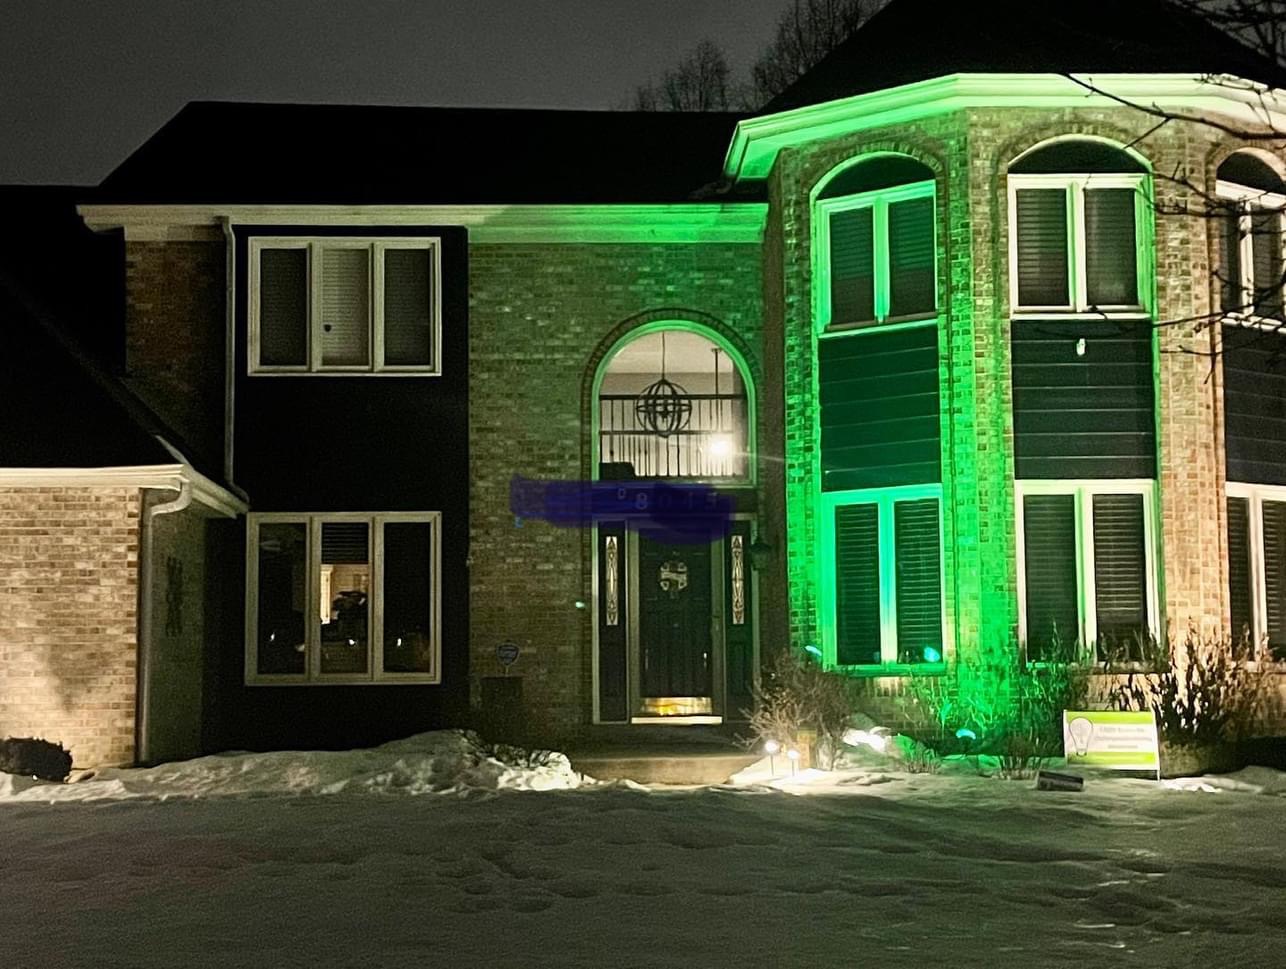 Upload your "Light It Green" photo